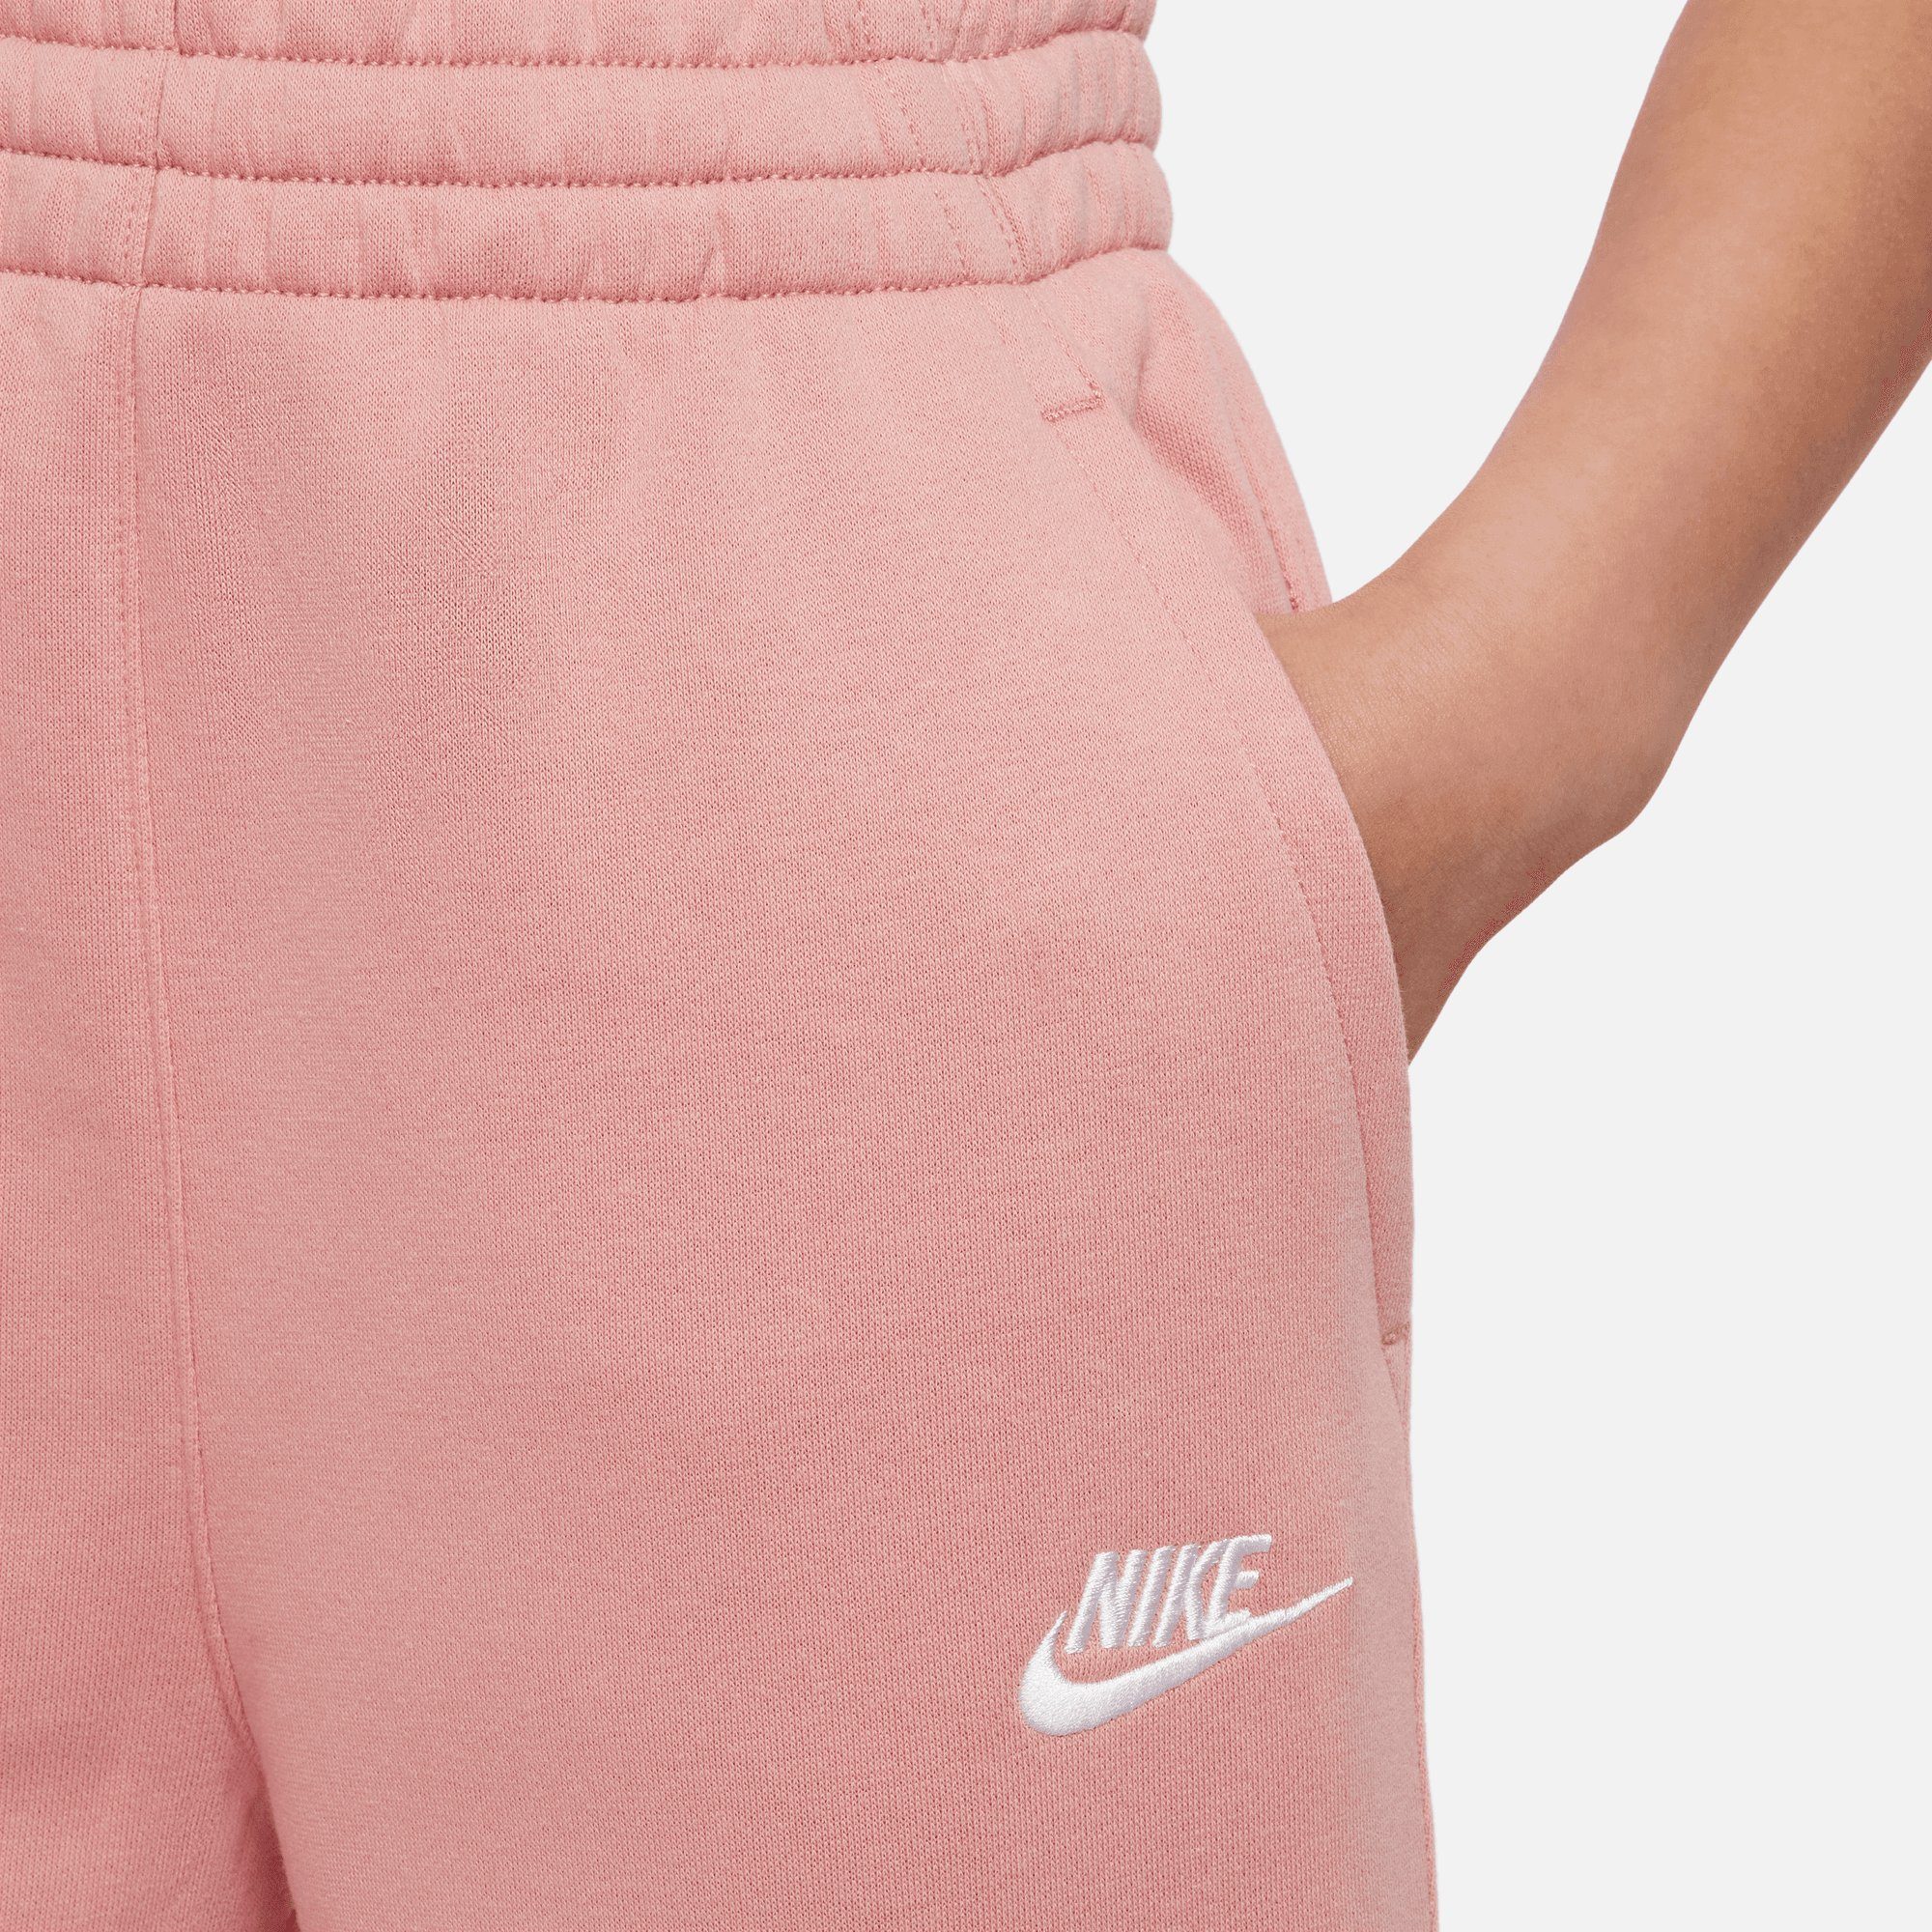 STARDUST/RED (GIRLS) STARDUST/WHITE Sportswear HIGH-WAISTED Jogginghose PANTS Nike BIG CLUB FITTED KIDS' RED FLEECE